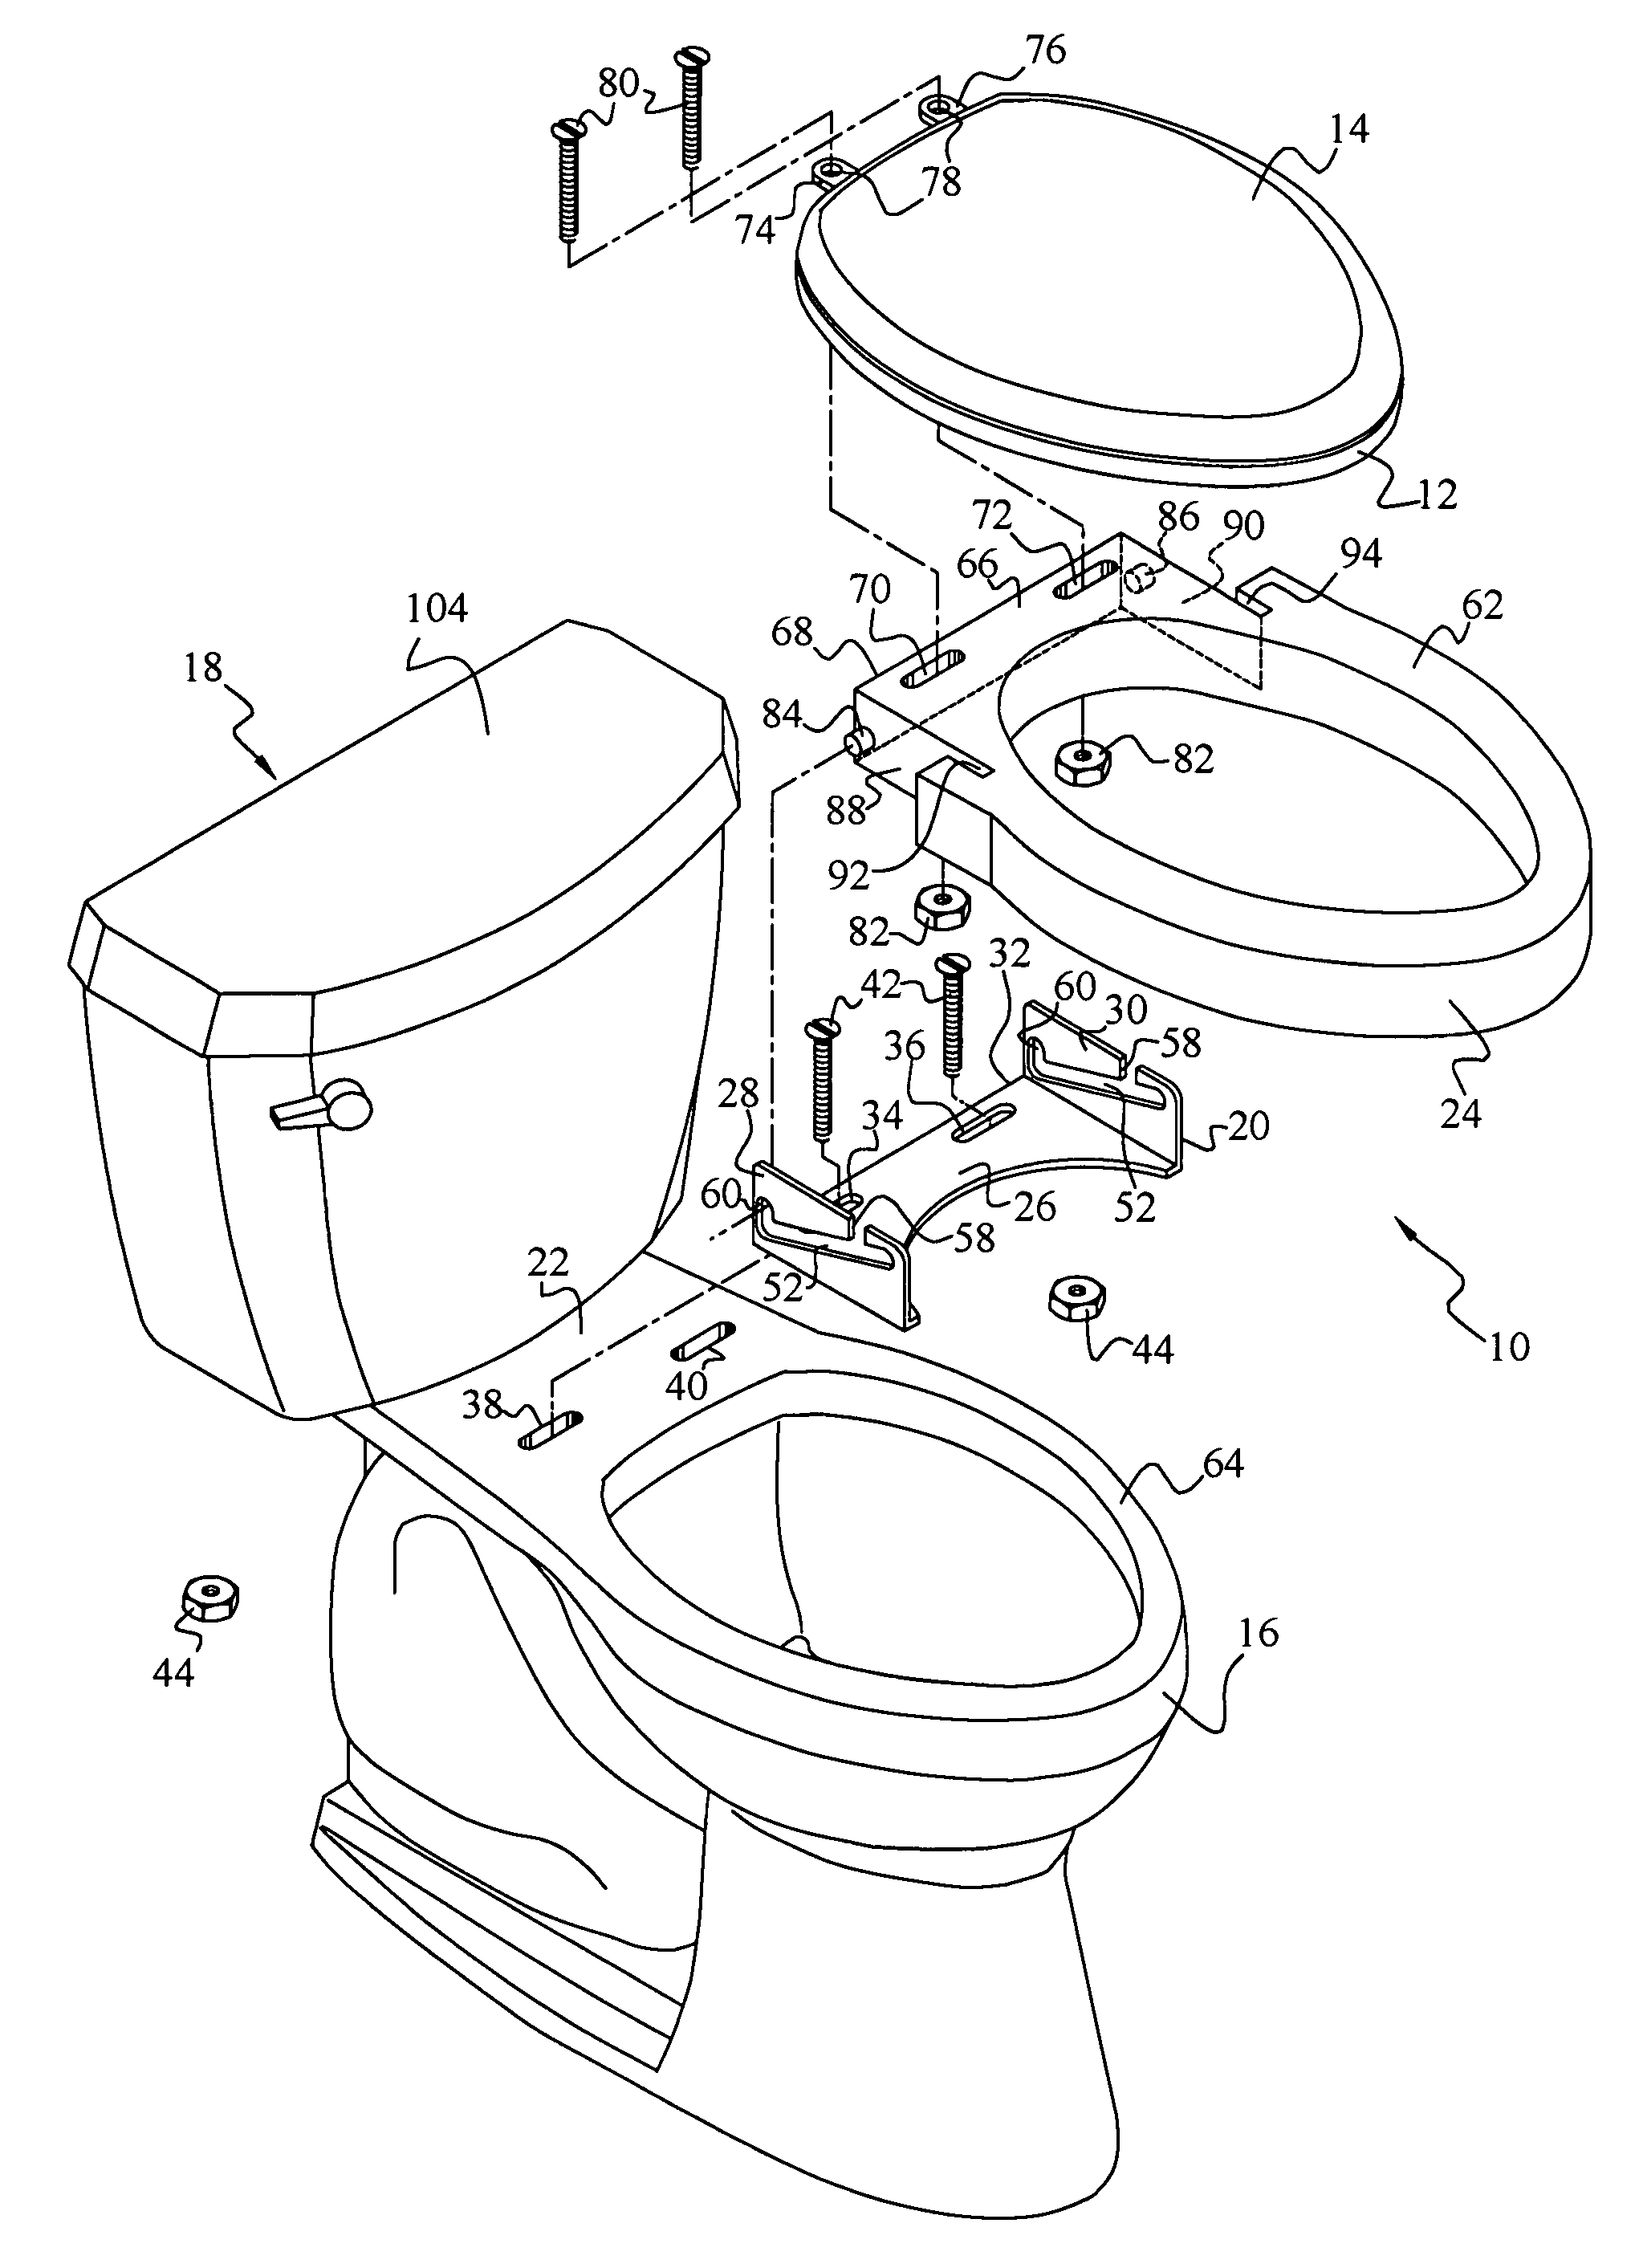 Toilet seat elevator assembly